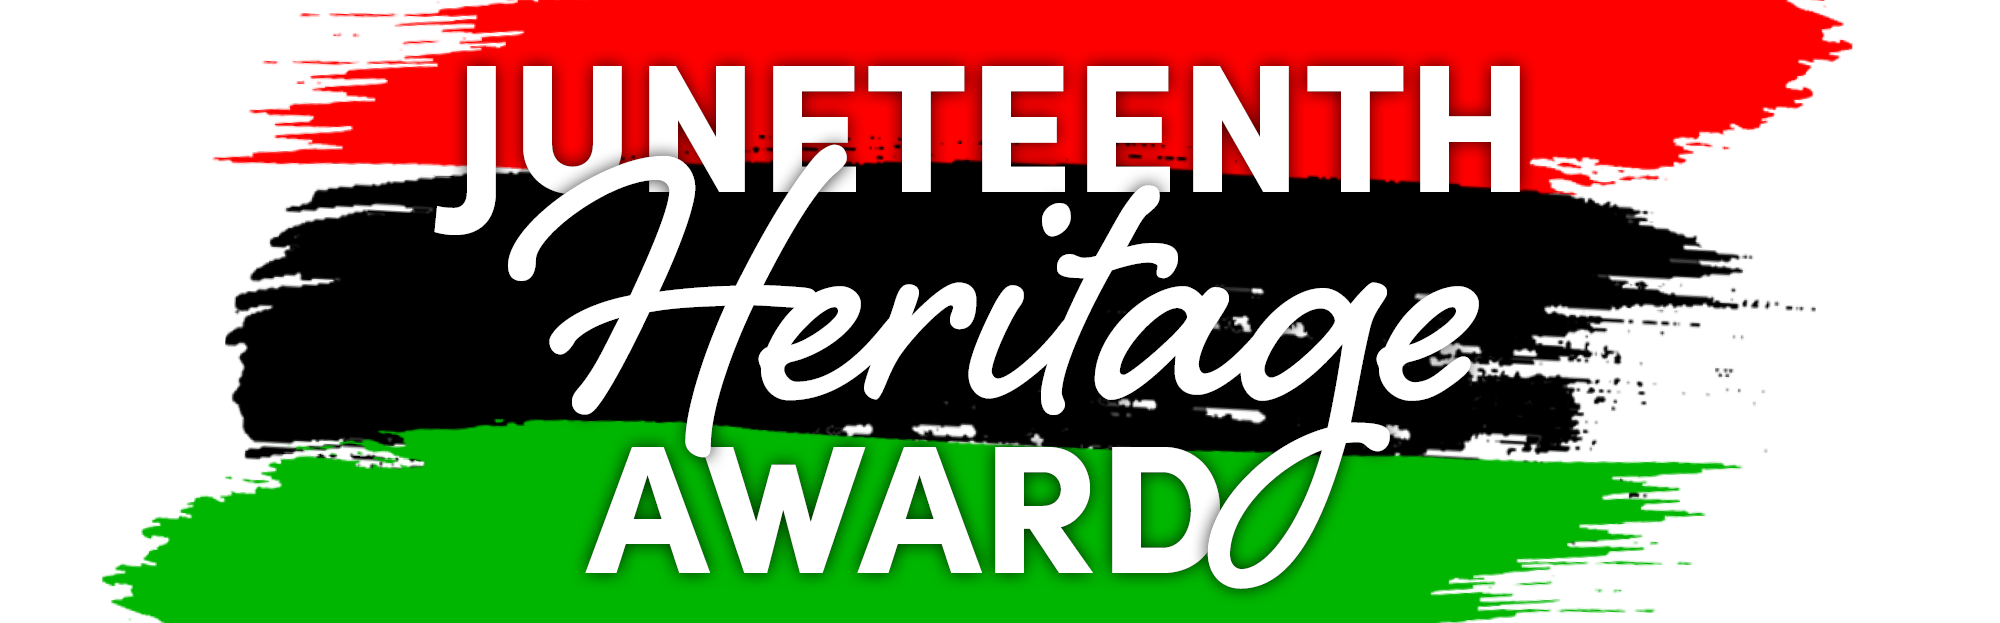 Juneteenth Heritage Award text with red, black, and green colors in the background